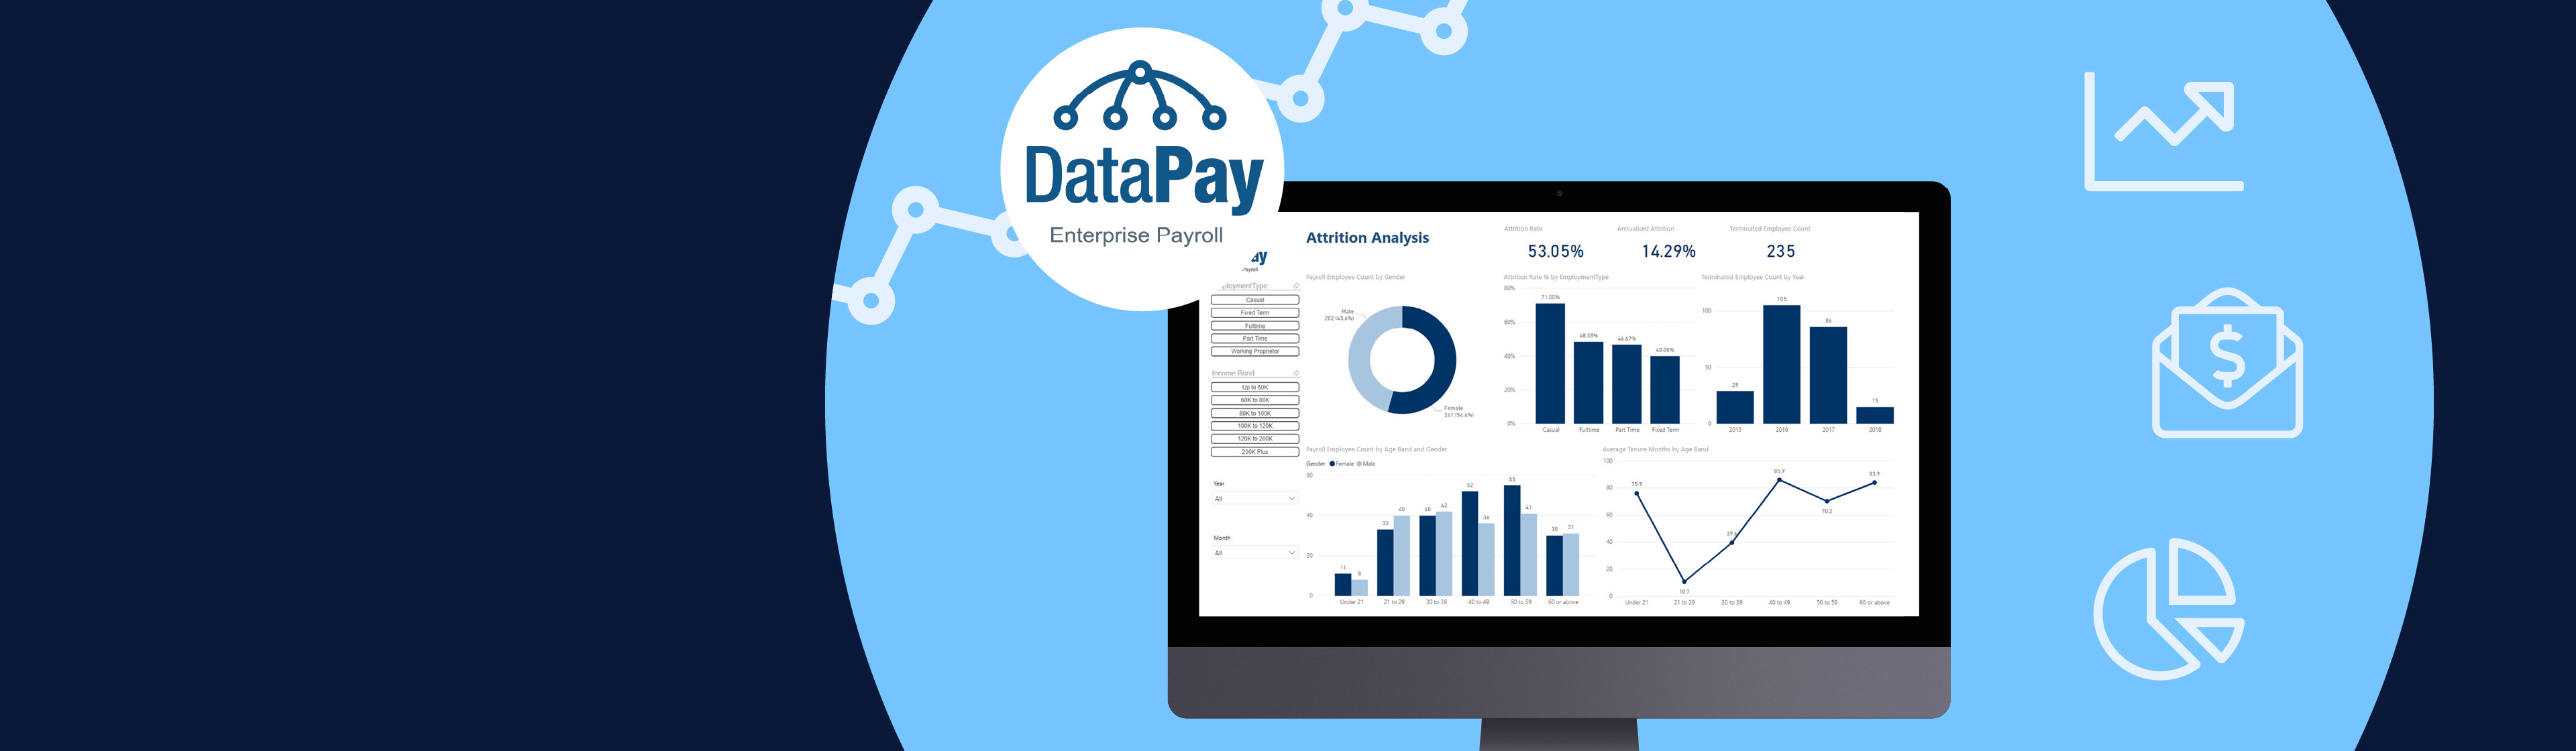 A monitor mockup of the DataPay software surrounded by the logo and payroll icons